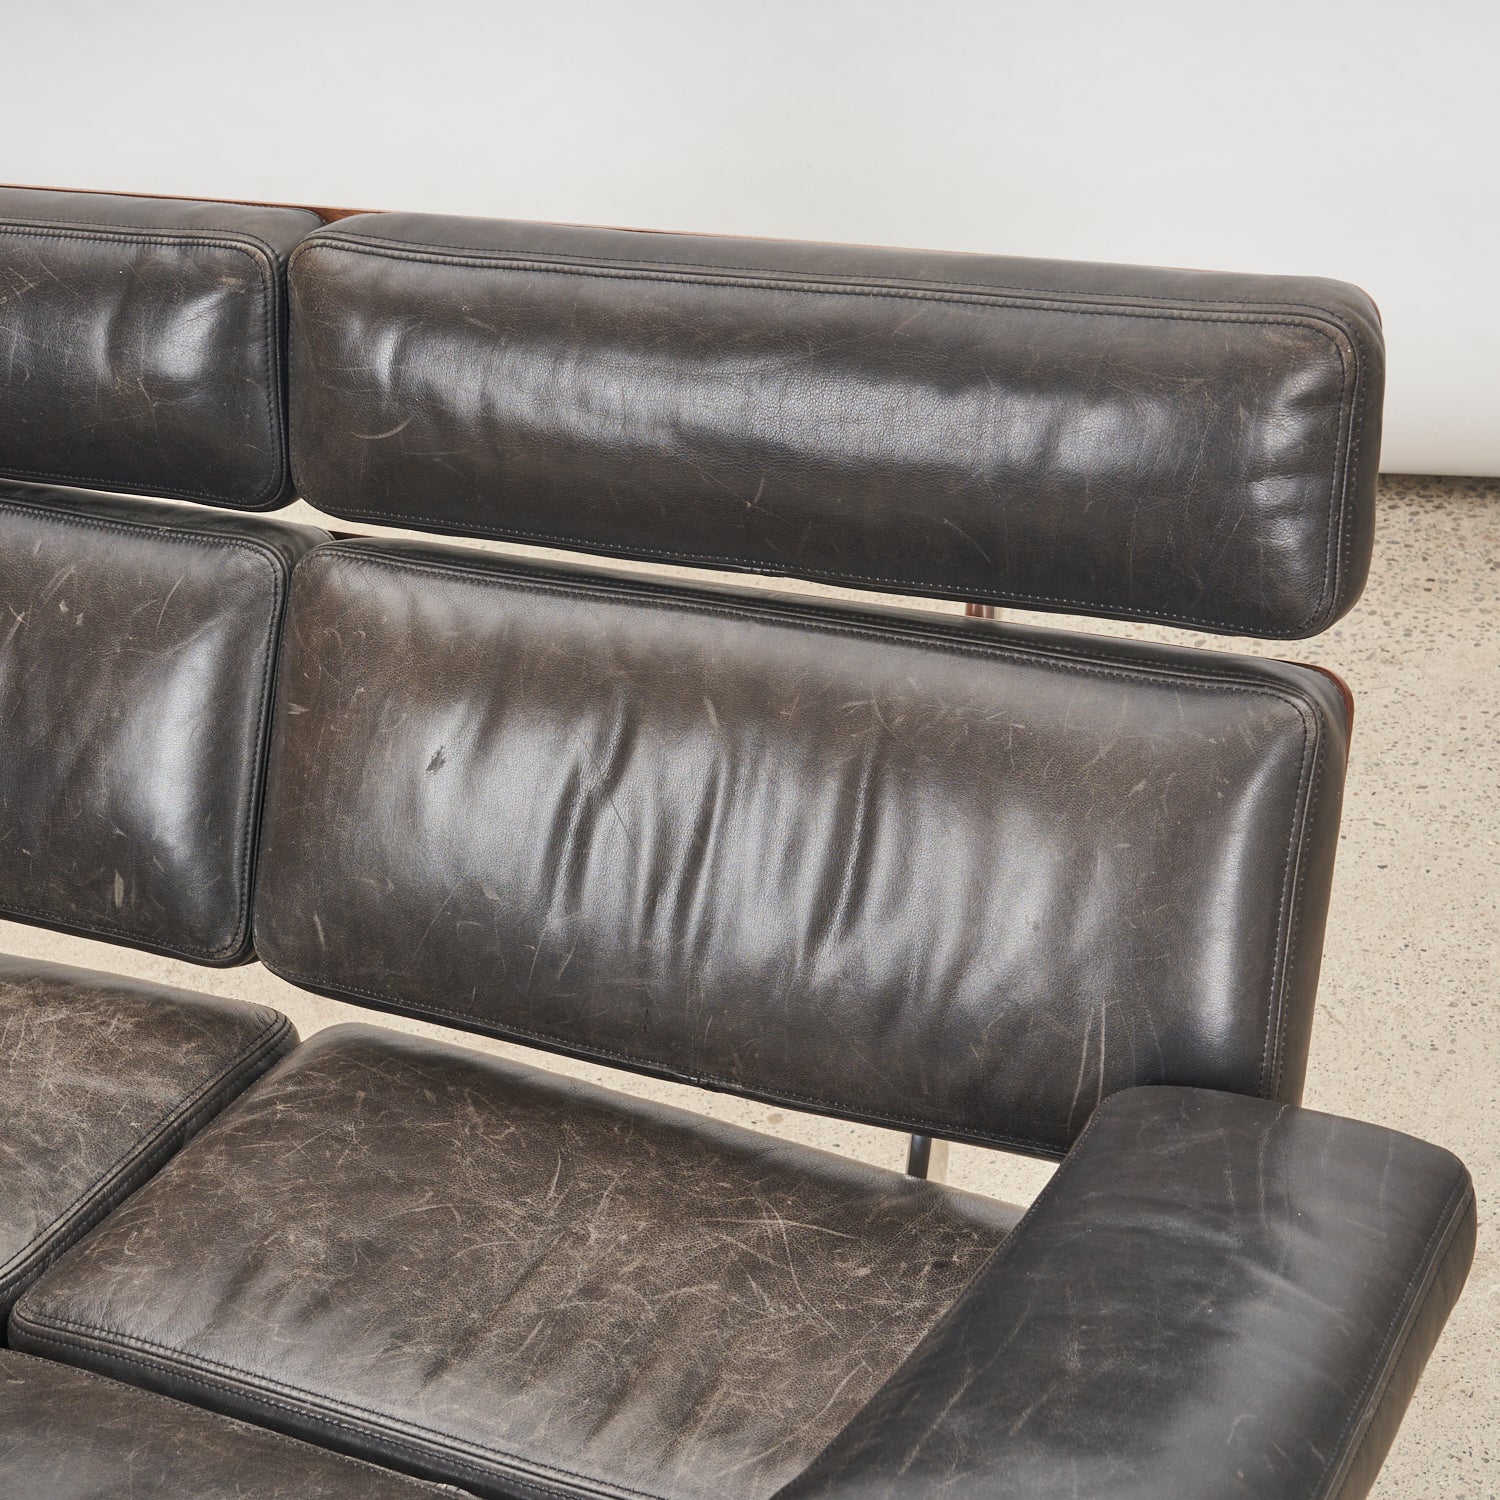 Eames Soft Pad Sofa in Leather & Walnut for Herman Miller